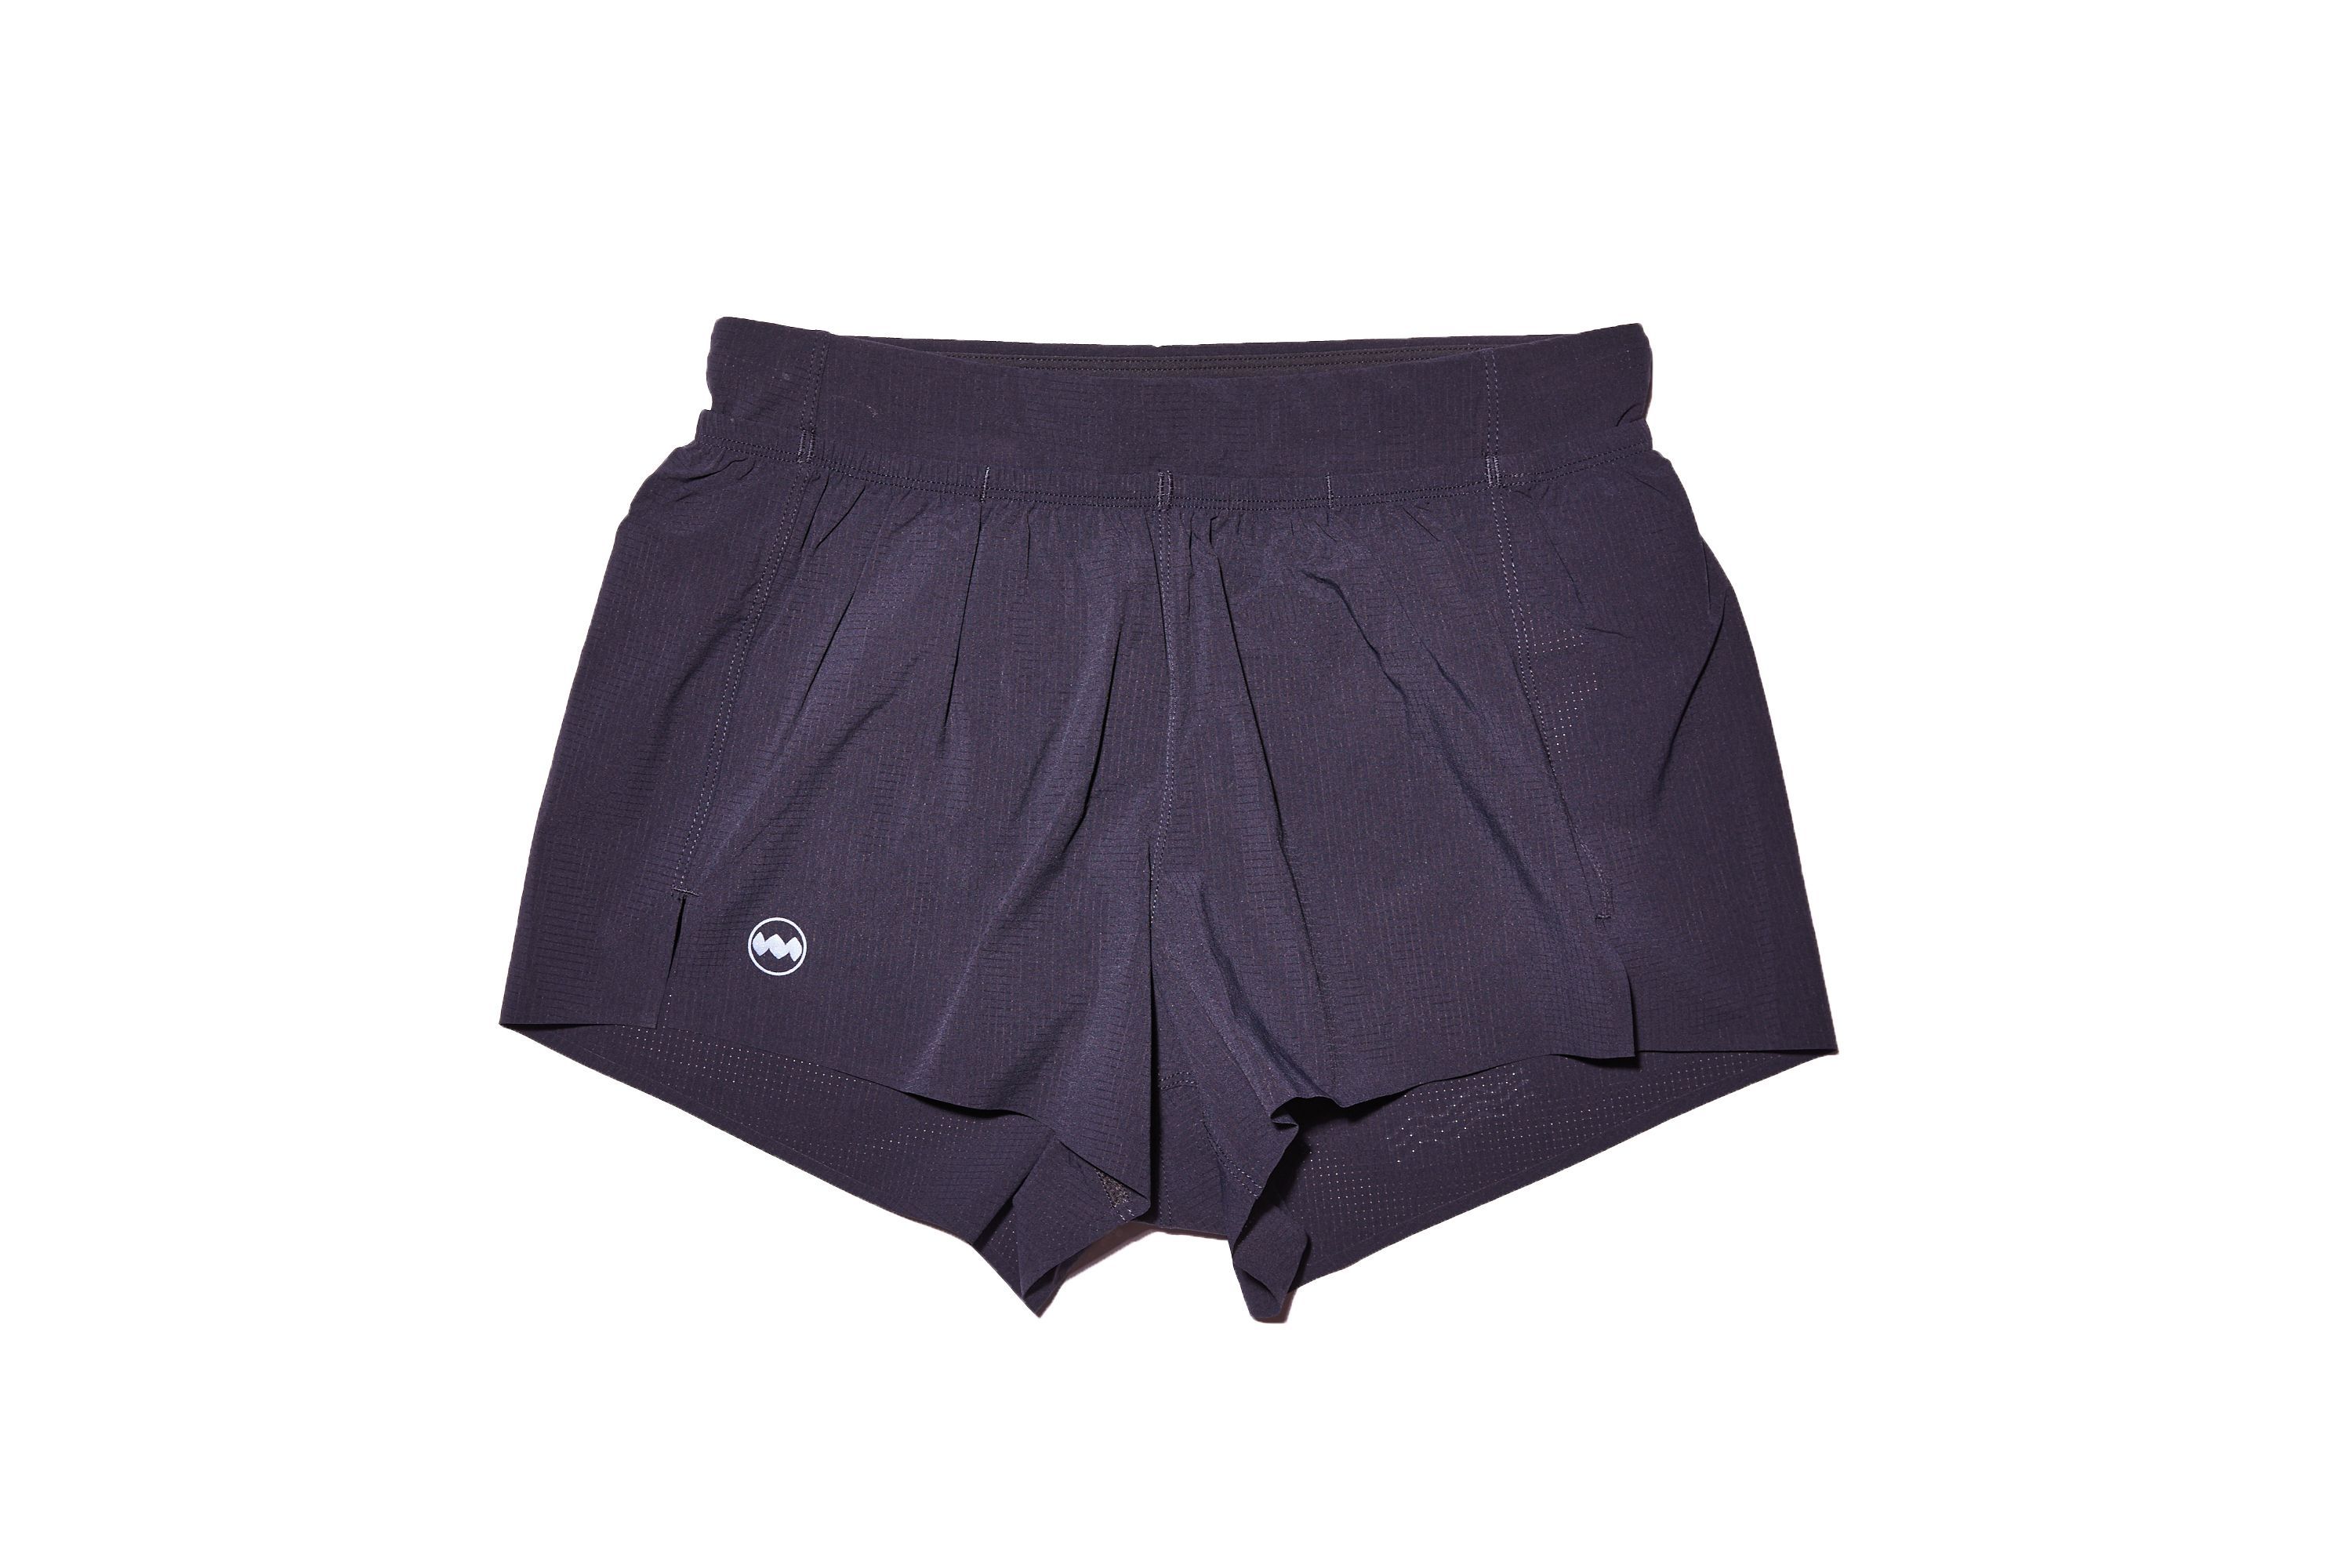 Craft Mens Deft Training and Running Shorts with 8.5 Inseam 